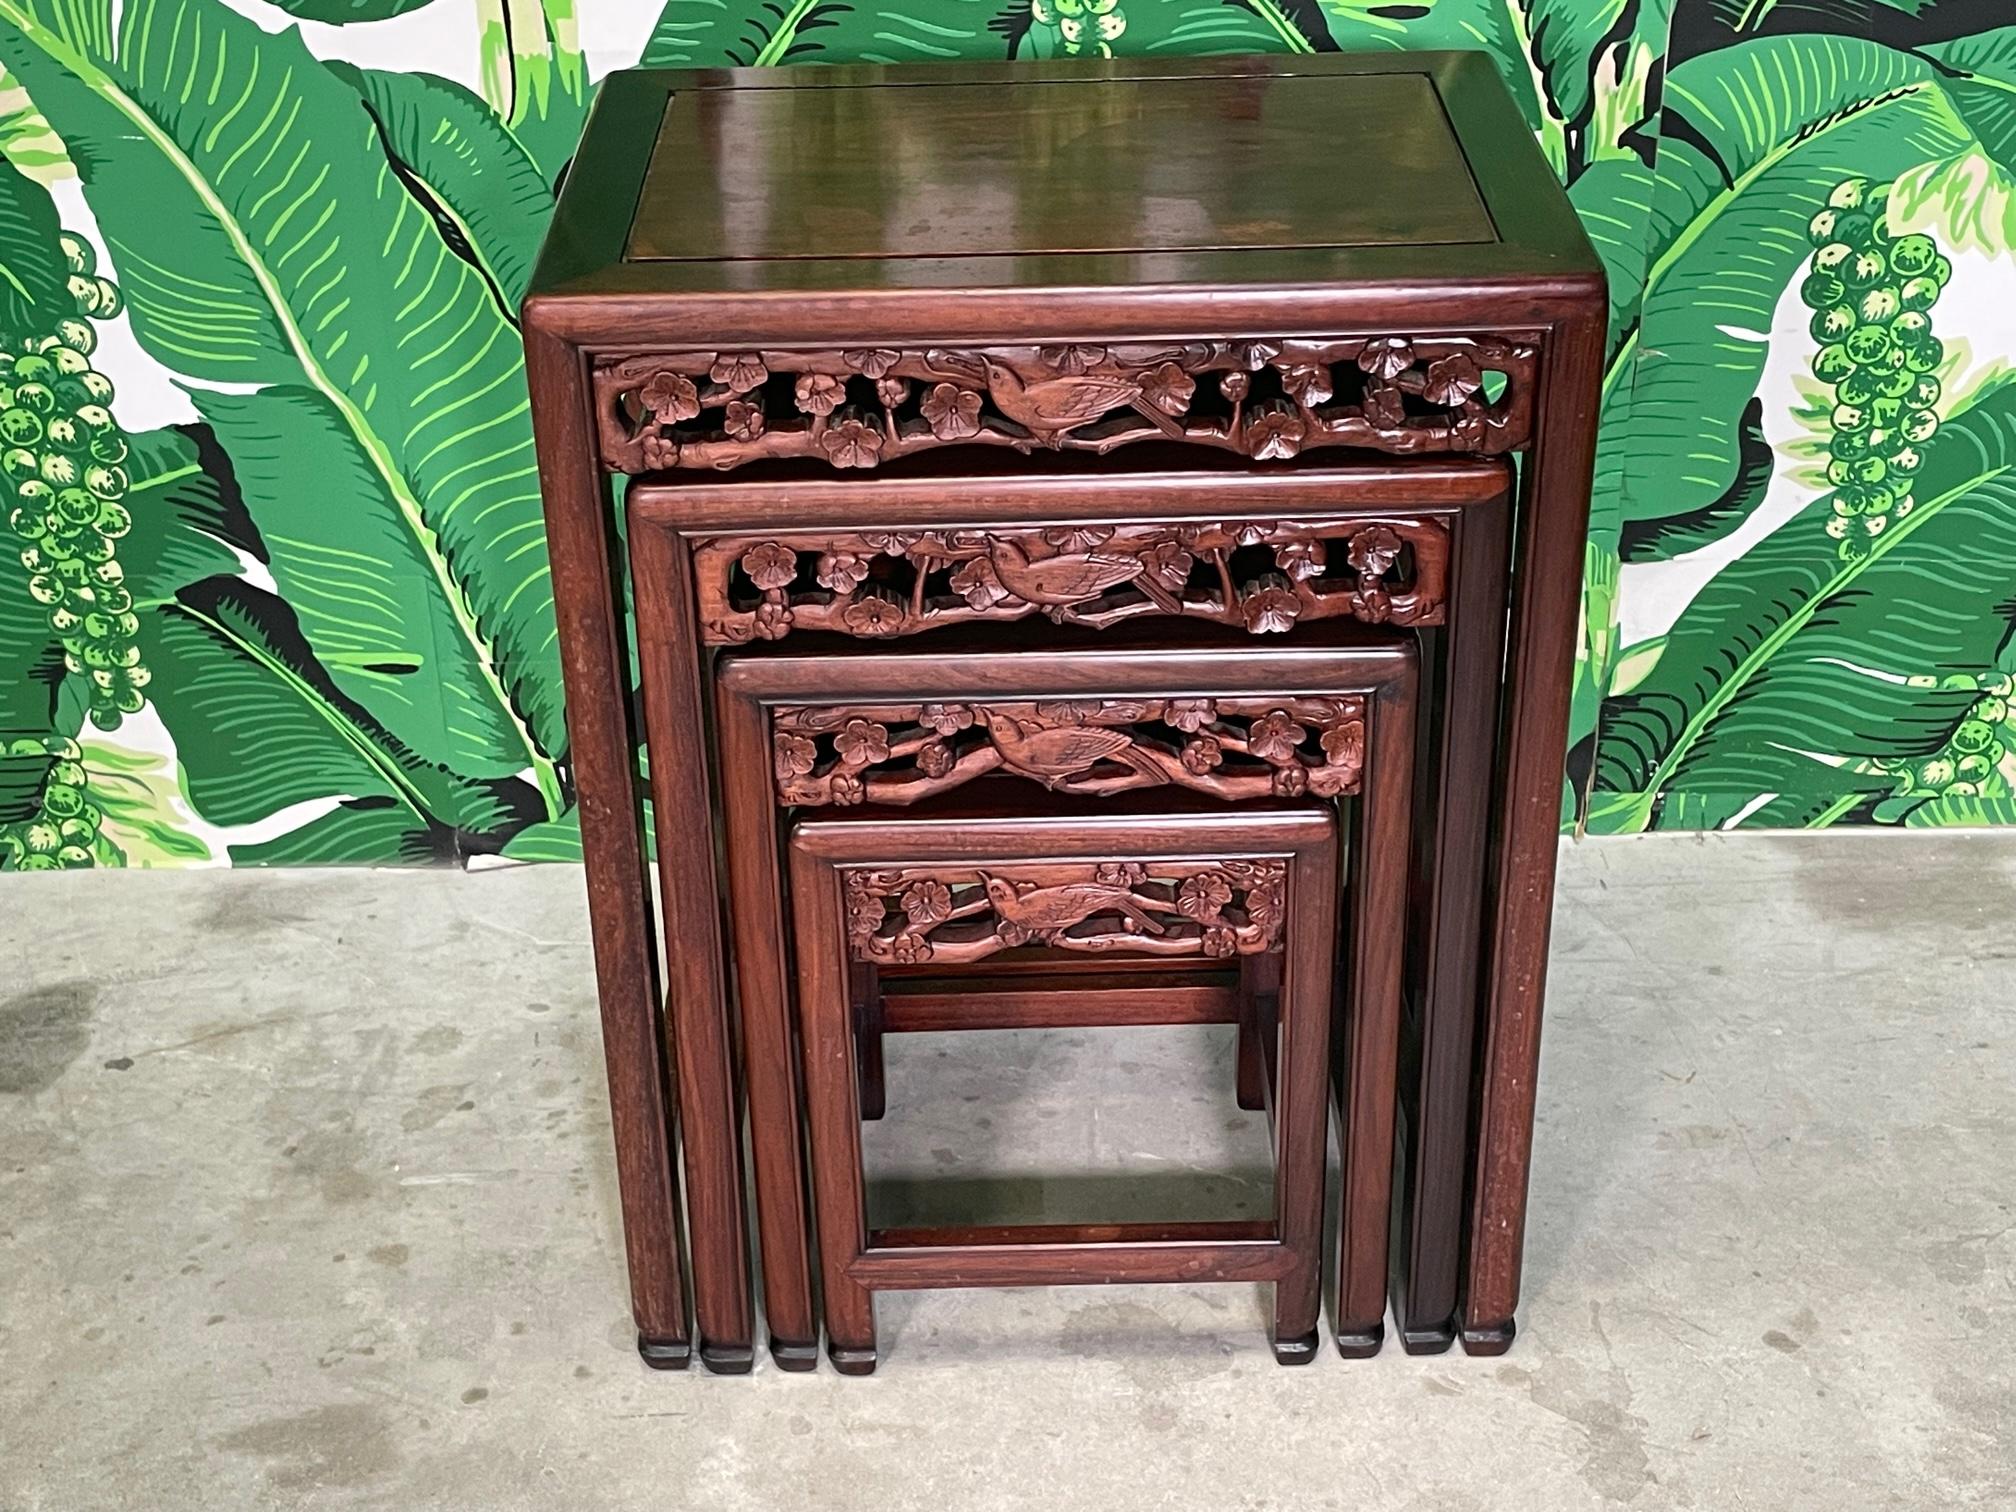 Chinese Chippendale Asian Hand Carved Rosewood Nesting Tables or Stacking Tables, Set of 4